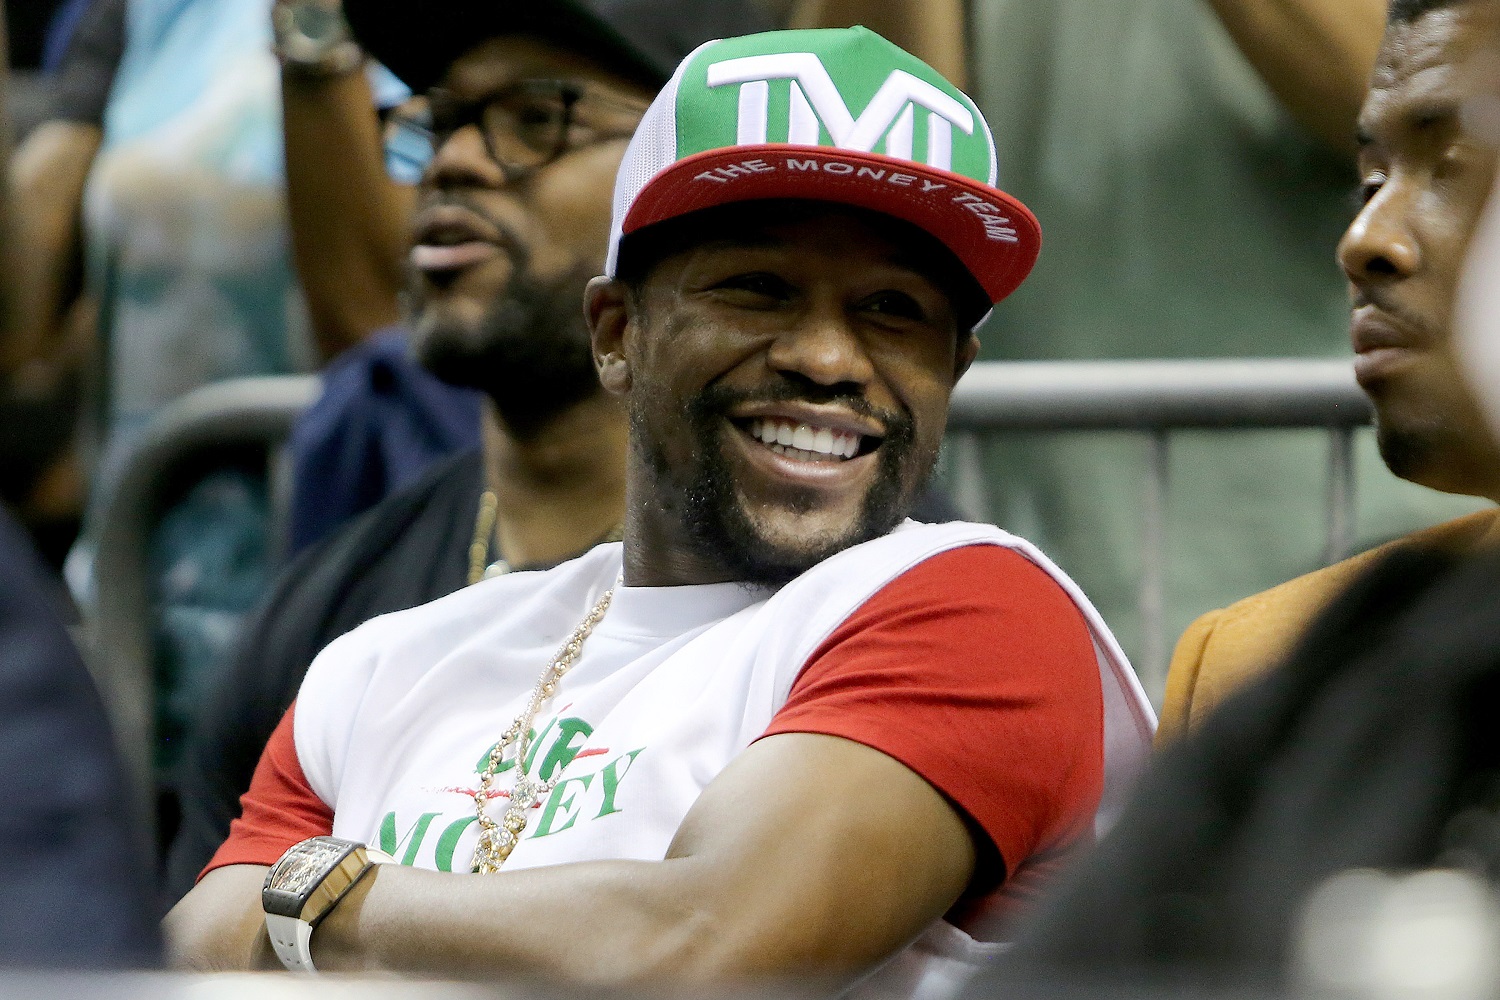 Floyd Mayweather Jr. has set a new date for his exhibition boxing match against Logan Paul.